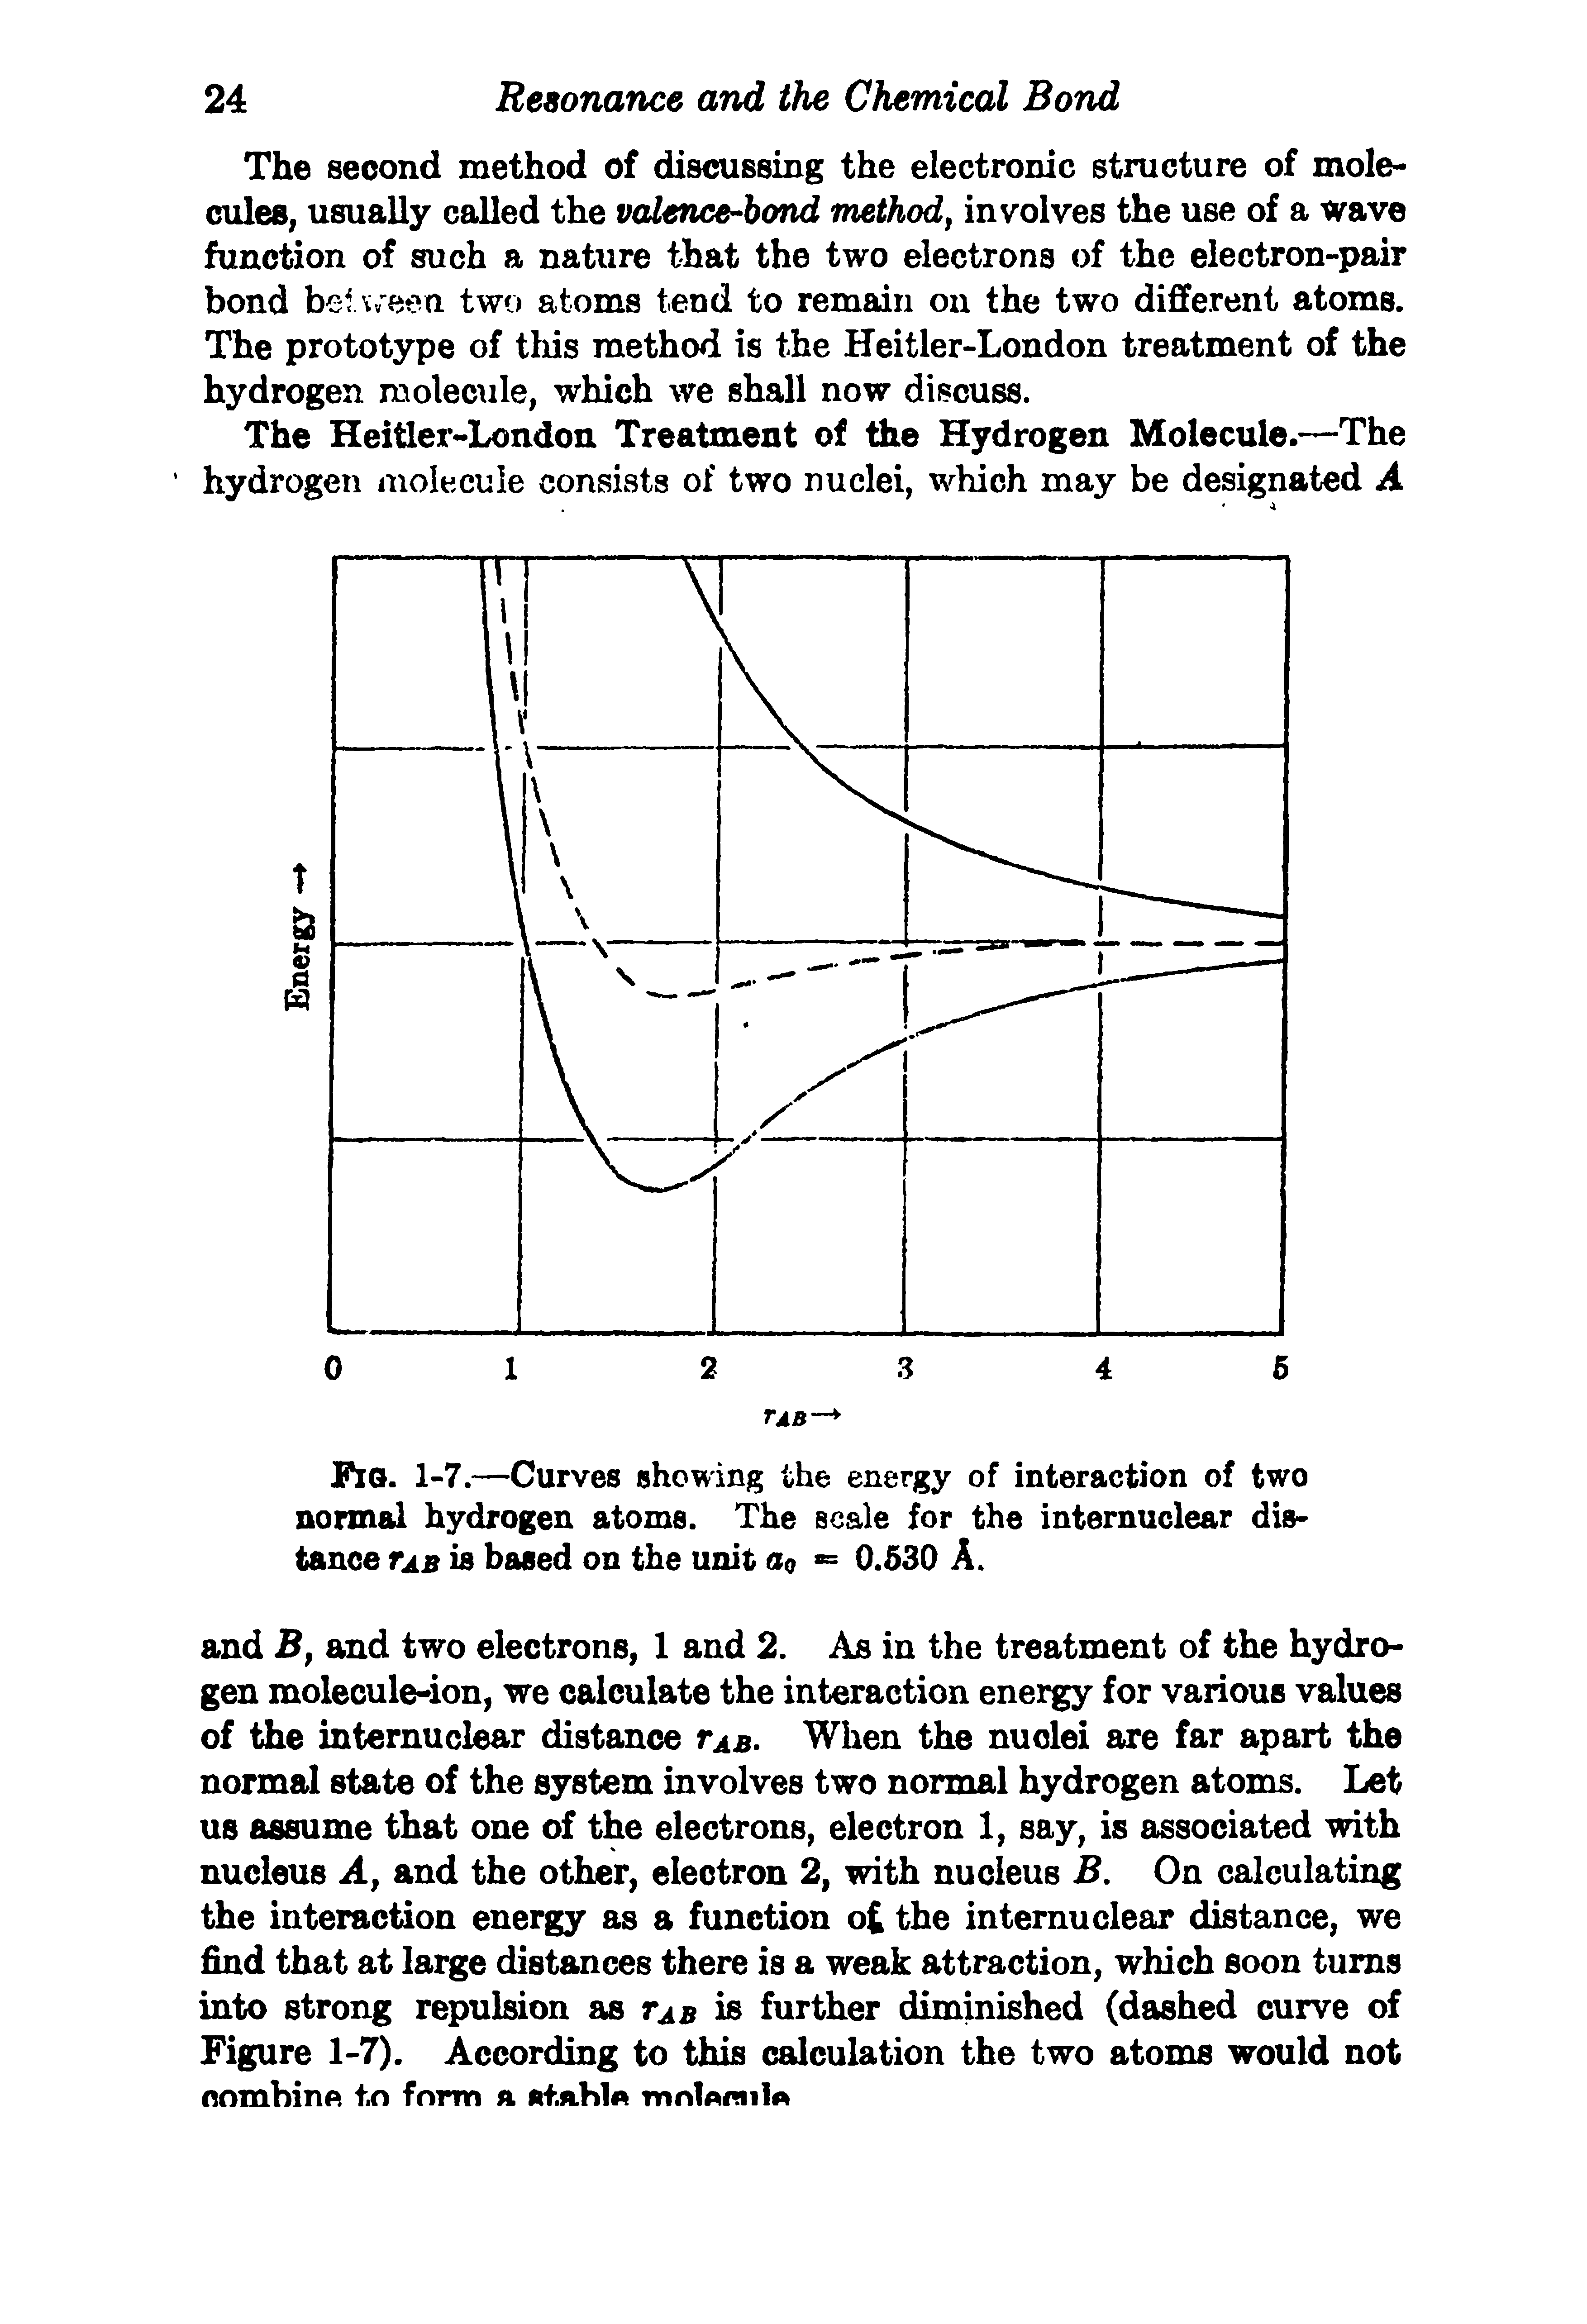 Fig. 1-7.—Curves showing the energy of interaction of two normal hydrogen atoms. The scale for the internuclear distance Tab is based on the unit a0 = 0.530 A.